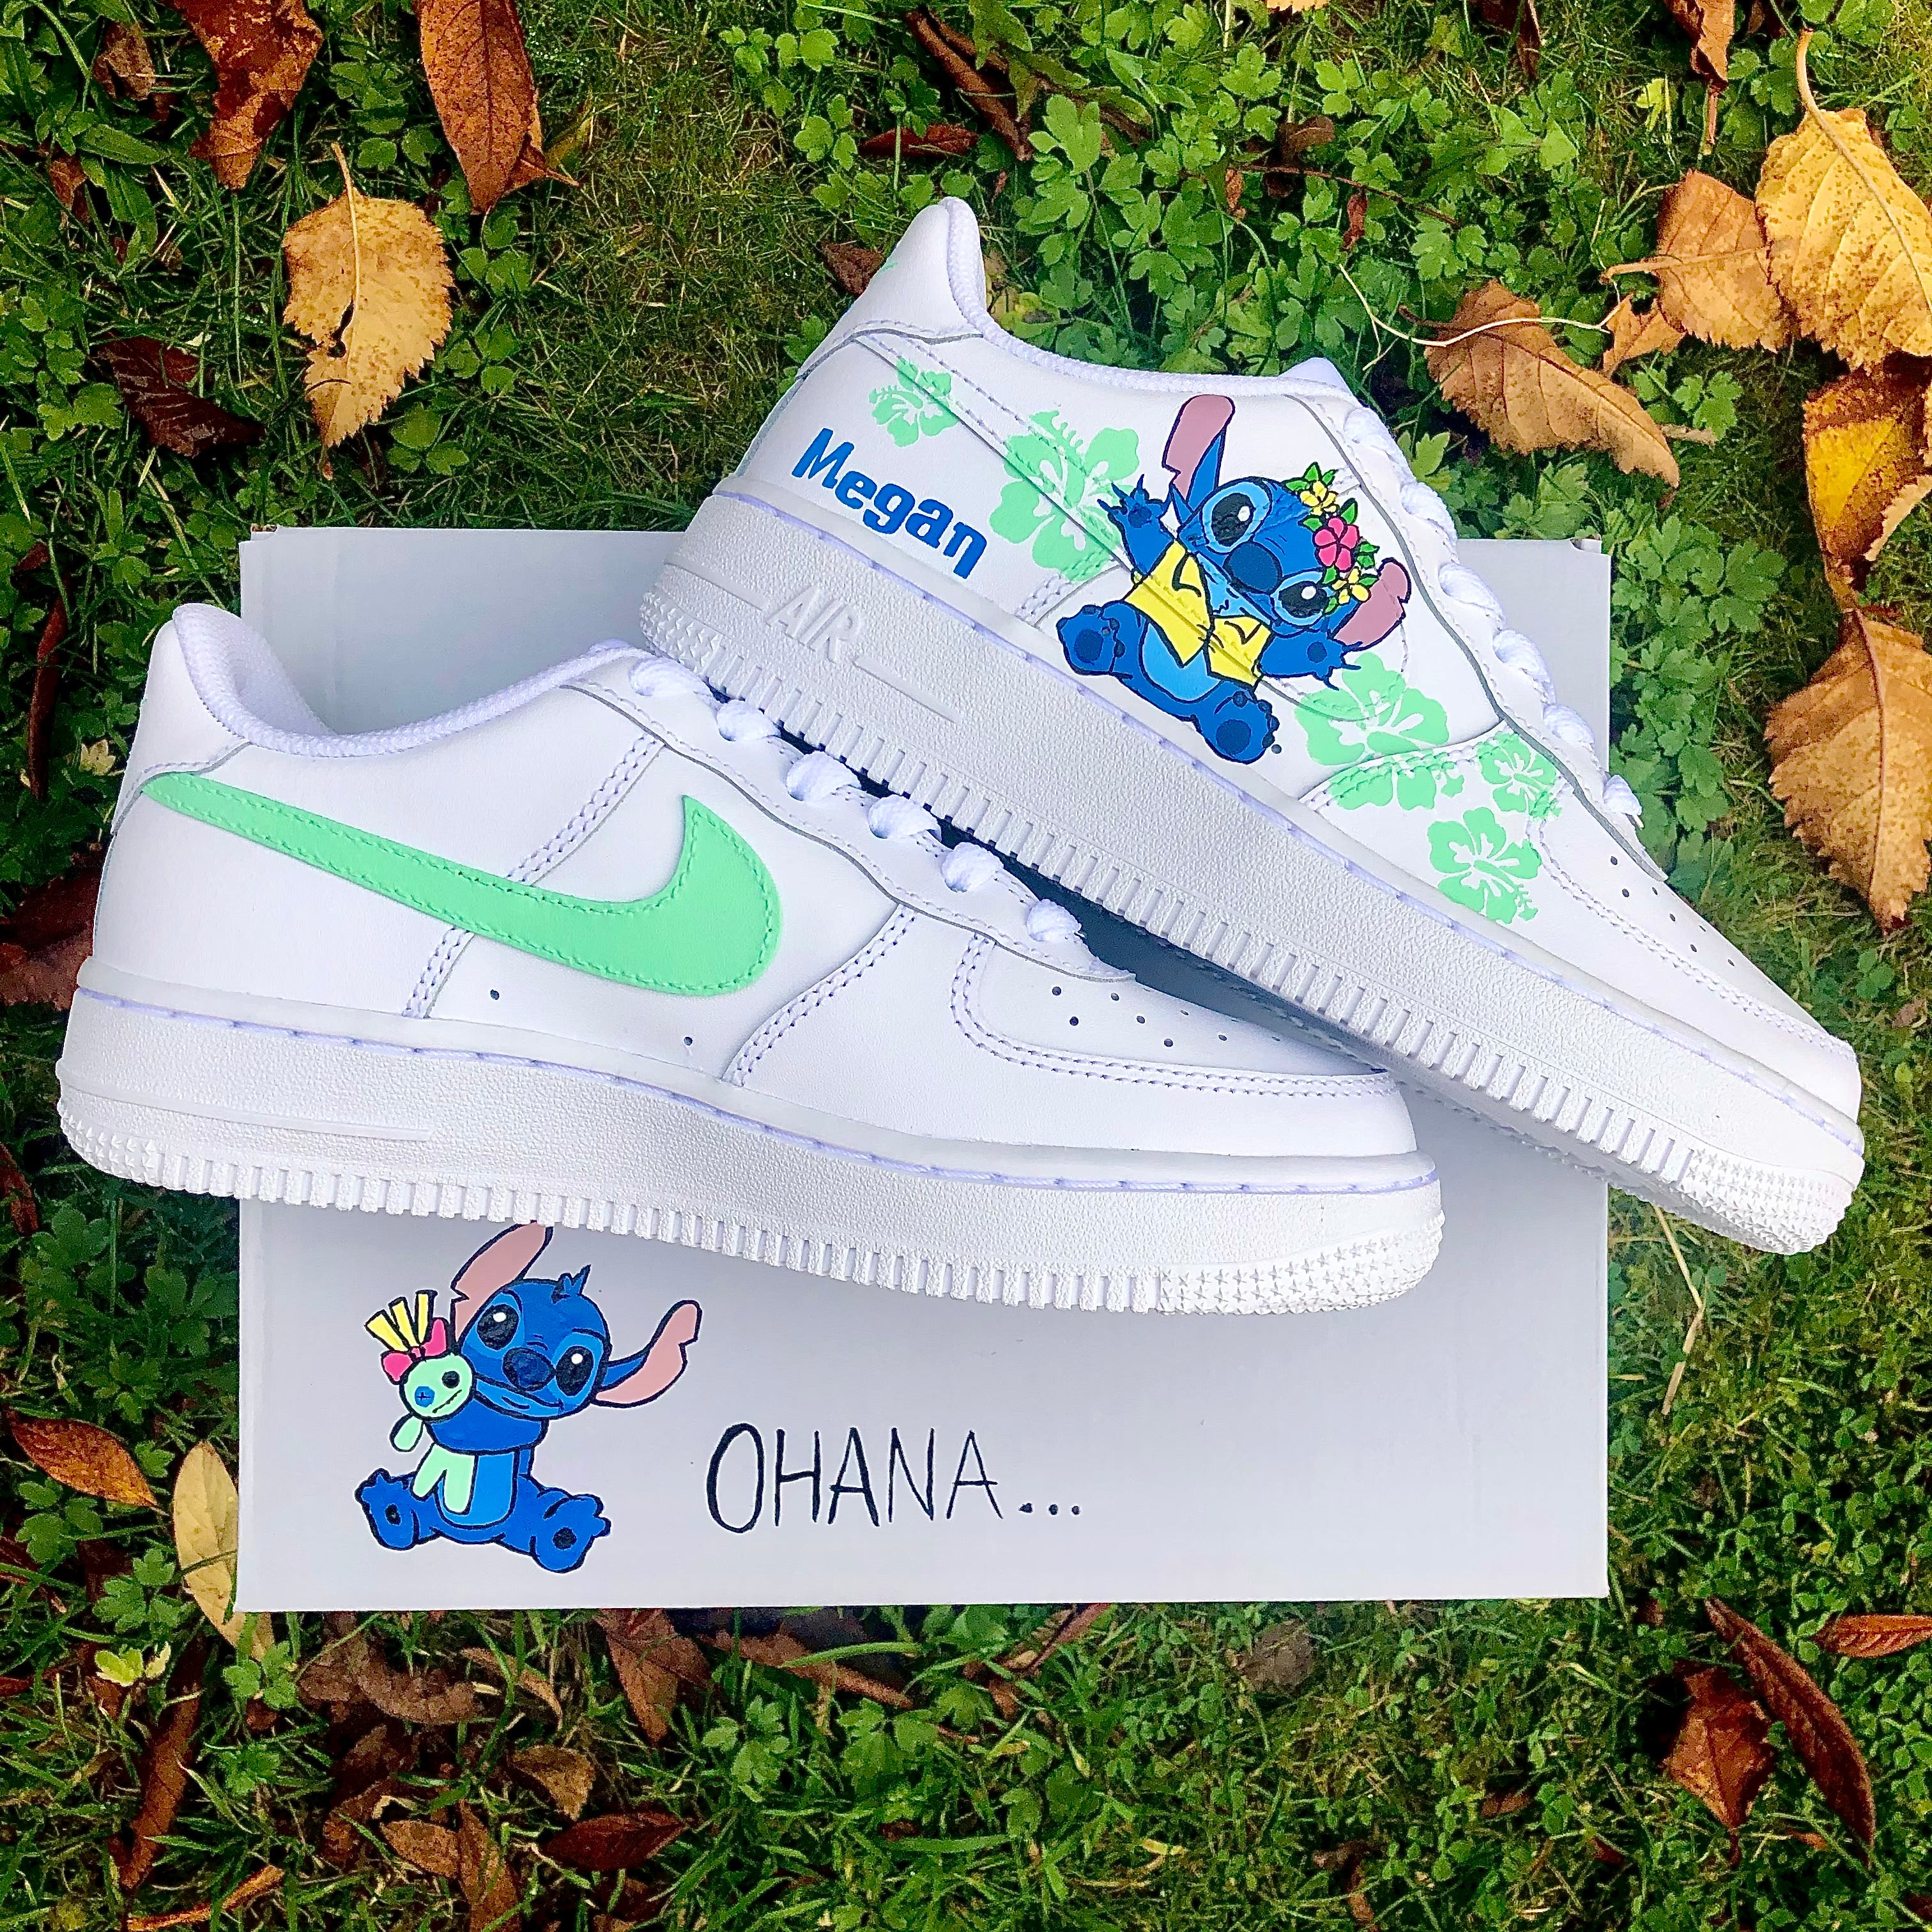 Custom Hand Painted Shoes Disney Stitch Character Art Graphic -  UK